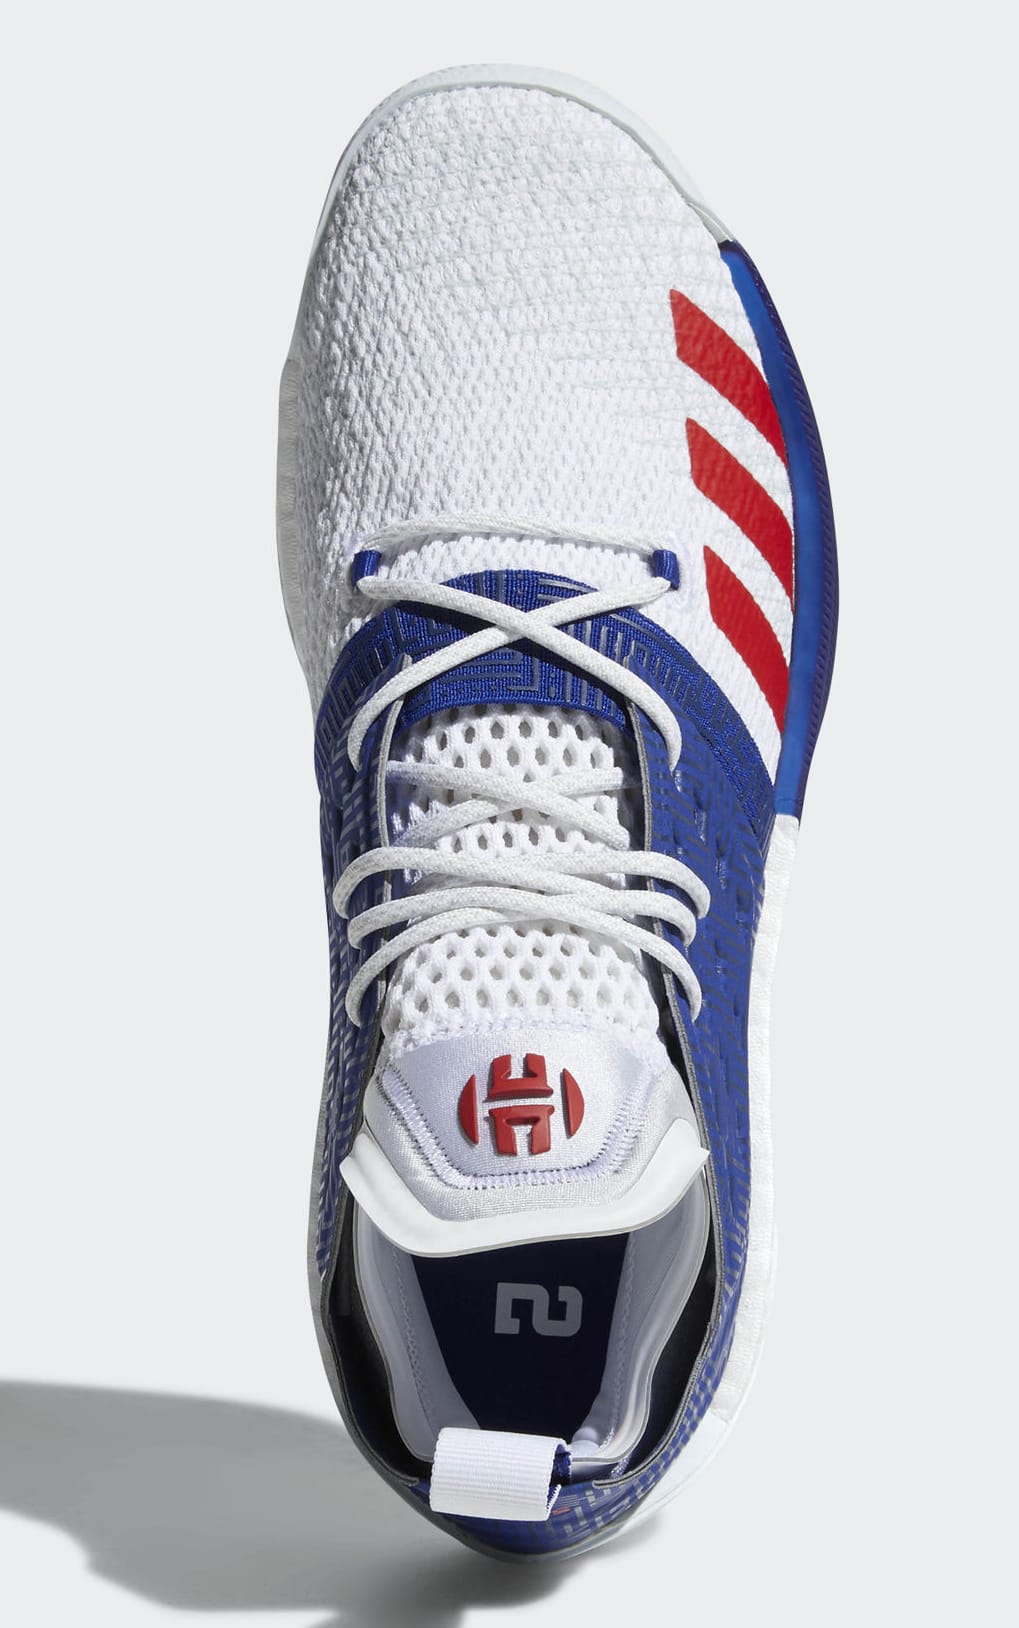 adidas-harden-vol-2-red-white-blue-aq0026-release-date-top